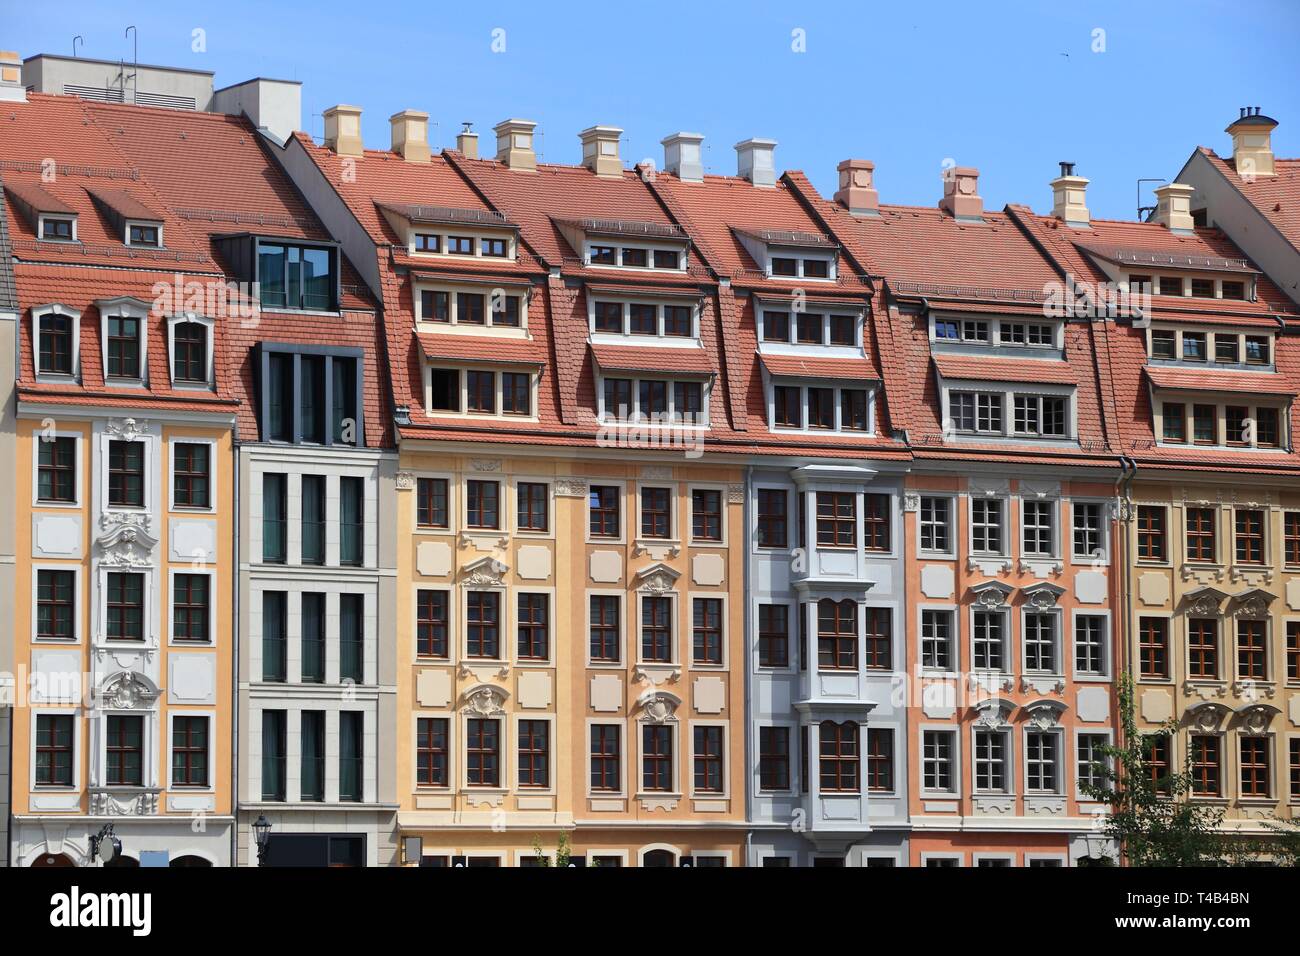 Dresden city in Germany (State of Sachsen). Old Town (Altstadt) colorful architecture street view. Stock Photo